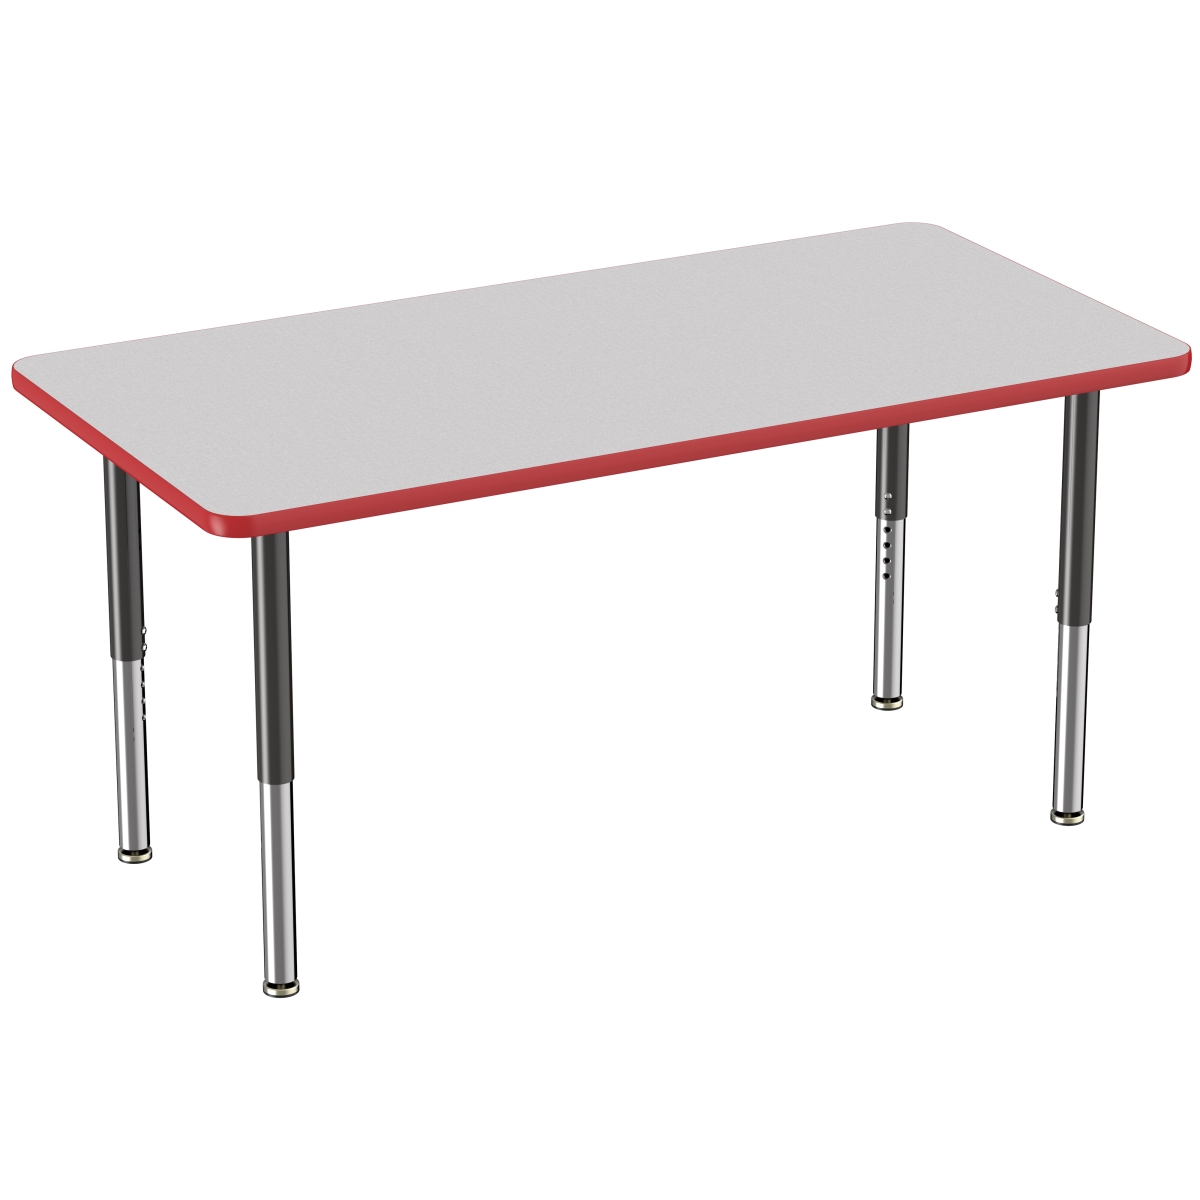 10026-gyrd 30 X 60 In. Rectangle T-mold Adjustable Activity Table With Super Leg - Grey & Red